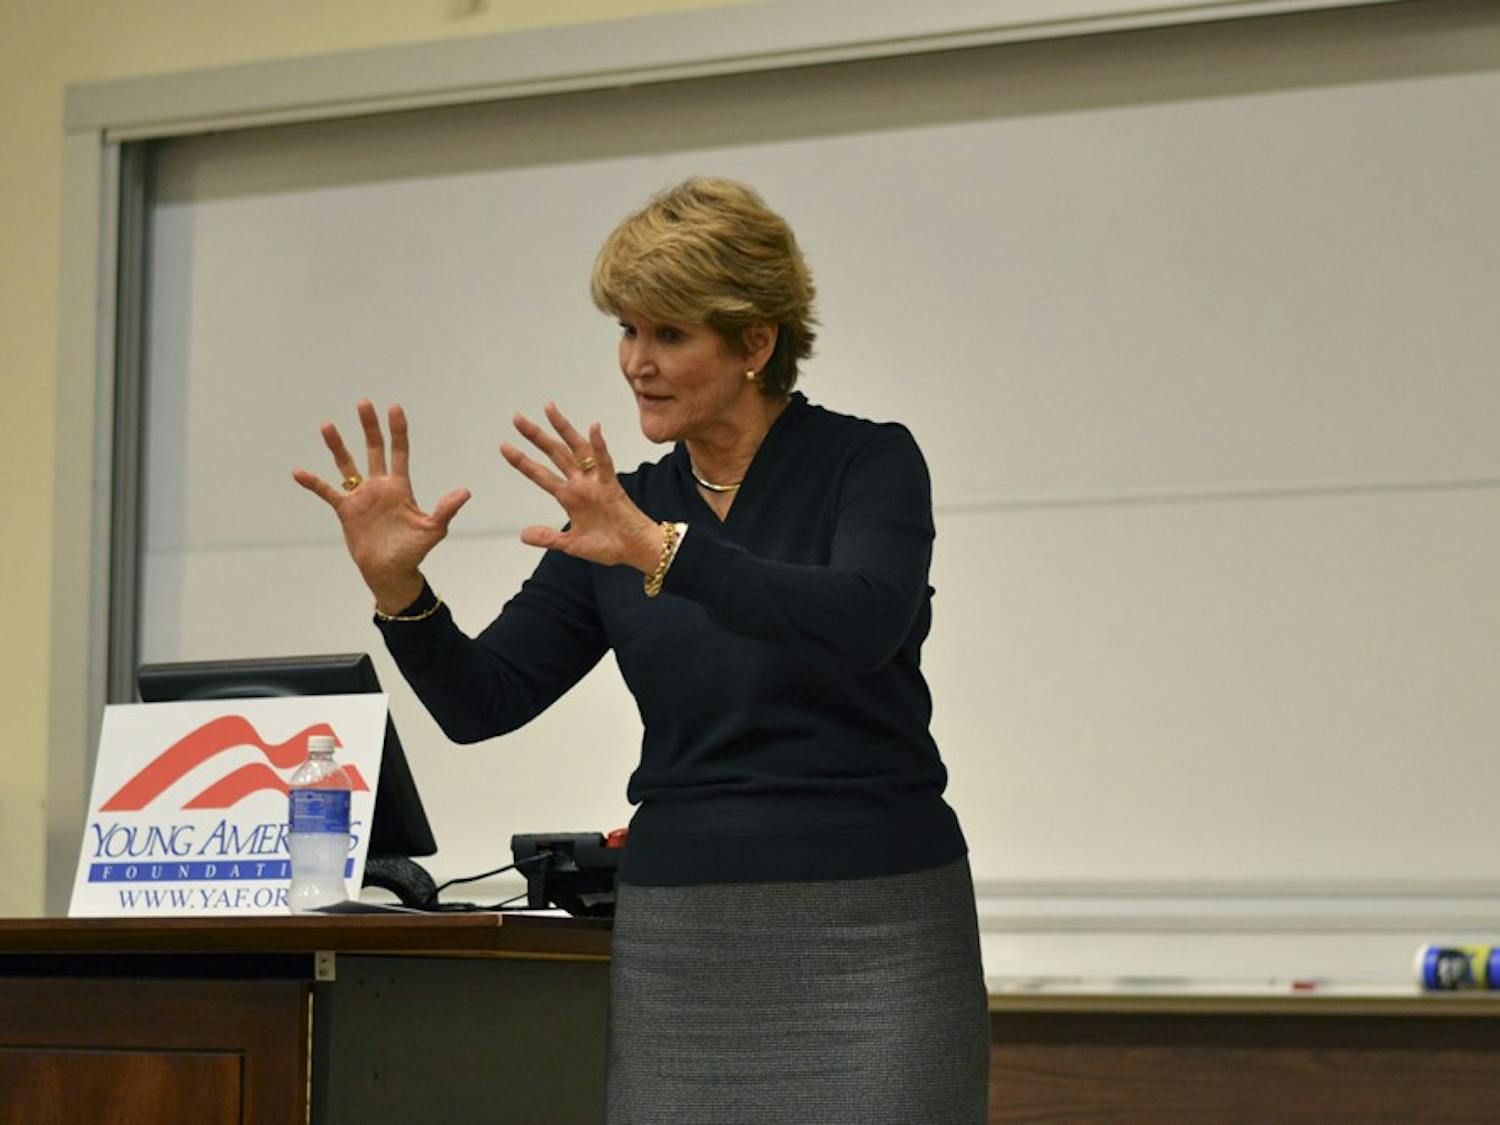 Bay Buchanan, former U.S. Treasurer for former president Ronald Reagan, spoke to students about the failure of feminismTuesday at Carroll Hall. Buchanan, a conservative activist, ultimately focused on the value of debate and personal development, encouraging students to speak up. "This country needs leaders like I've never seen before," Buchanan said. Bay Buchanan, former U.S. Treasurer for former President Ronald Reagan, spoke to students about the failure of feminismTuesday at Carroll Hall. Buchanan, a conservative activist, focused on the value of debate and personal development, encouraging students to speak up. "This country needs leaders like I've never seen before," Buchanan said. Bay Buchanan, U.S. Treasurer for former President Ronald Reagan, spoke to students about the failure of feminismTuesday at Carroll Hall. Buchanan, a conservative activist, focused on the value of debate and personal development, encouraging students to speak up. "This country needs leaders like I've never seen before," Buchanan said. 